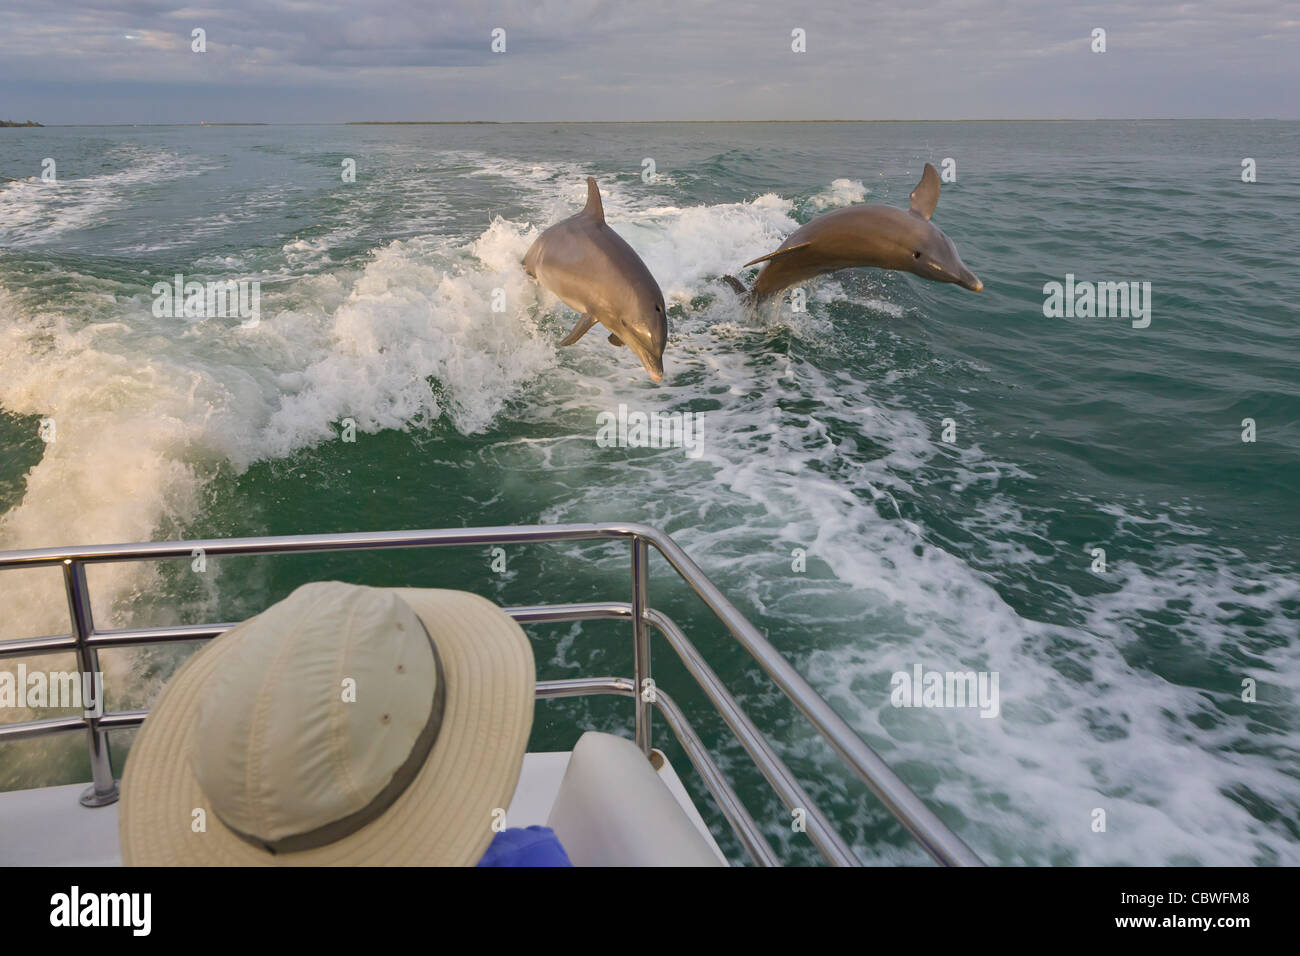 Bottlenose Dolphin jumping swimming in the waters off Gasparilla Island Florida Stock Photo